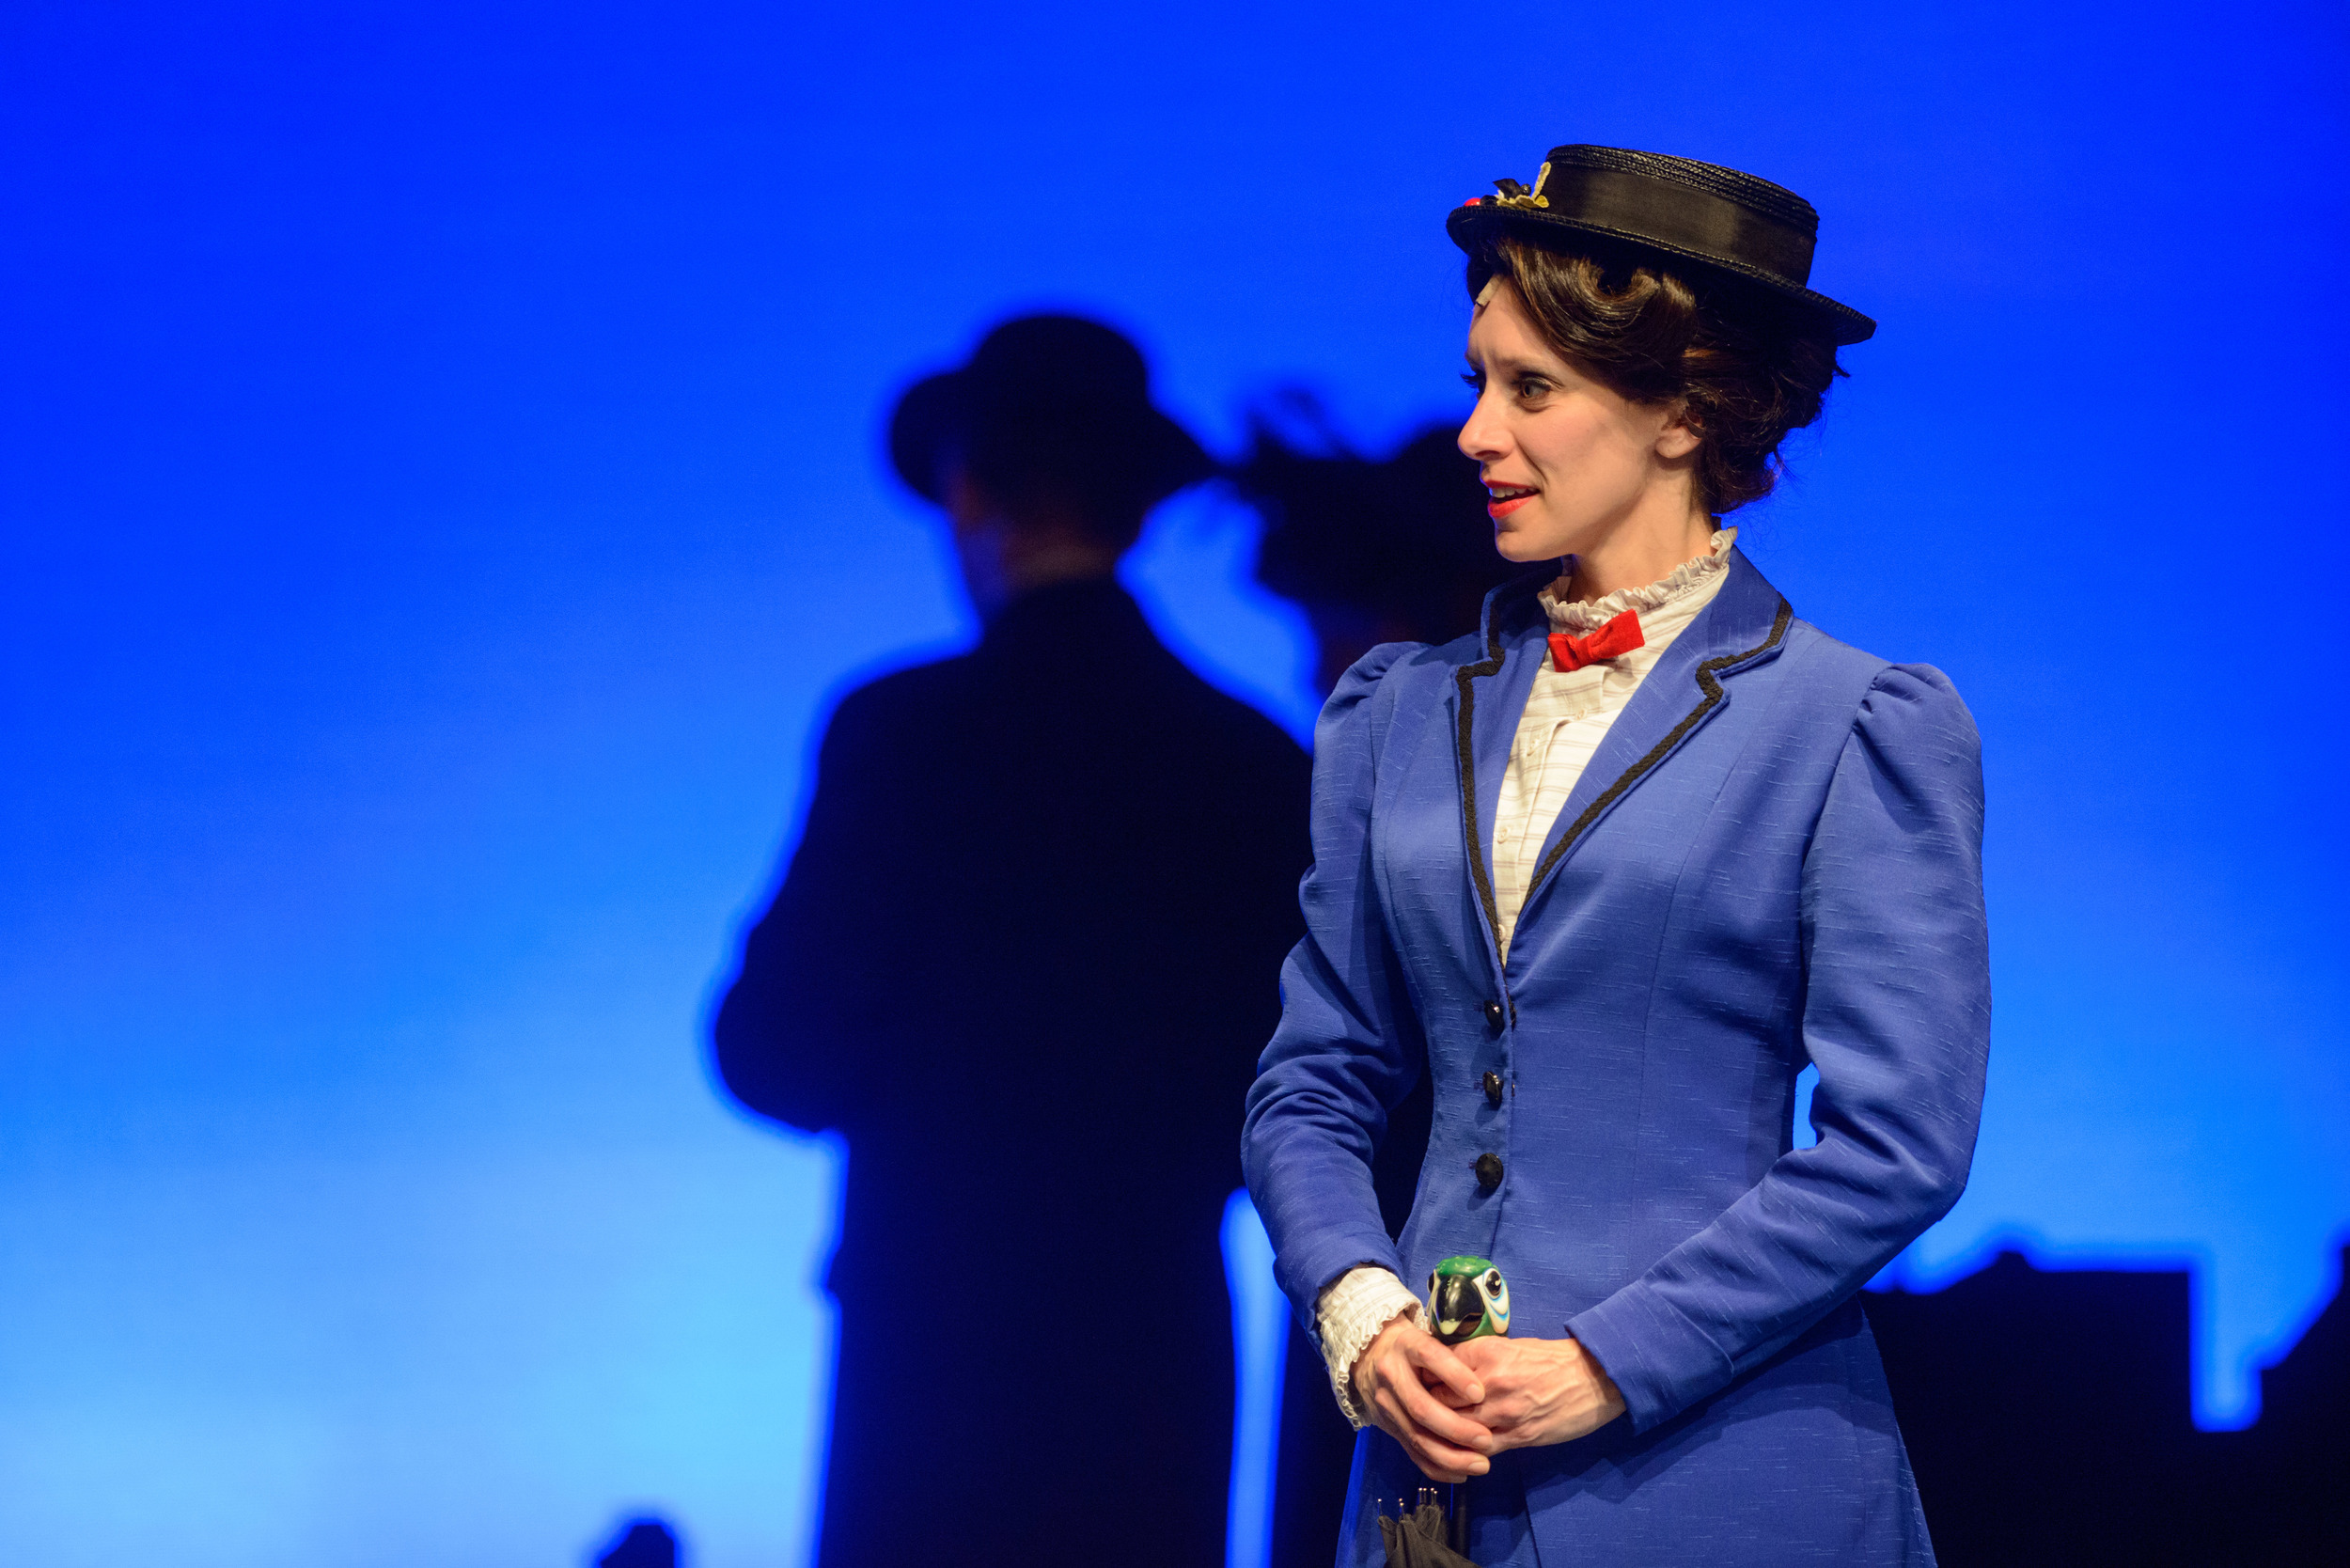  Mary Poppins in "Mary Poppins" (Western Canada Theatre &amp; Persephone Theatre)  *Photo by Stephen Rutherford 